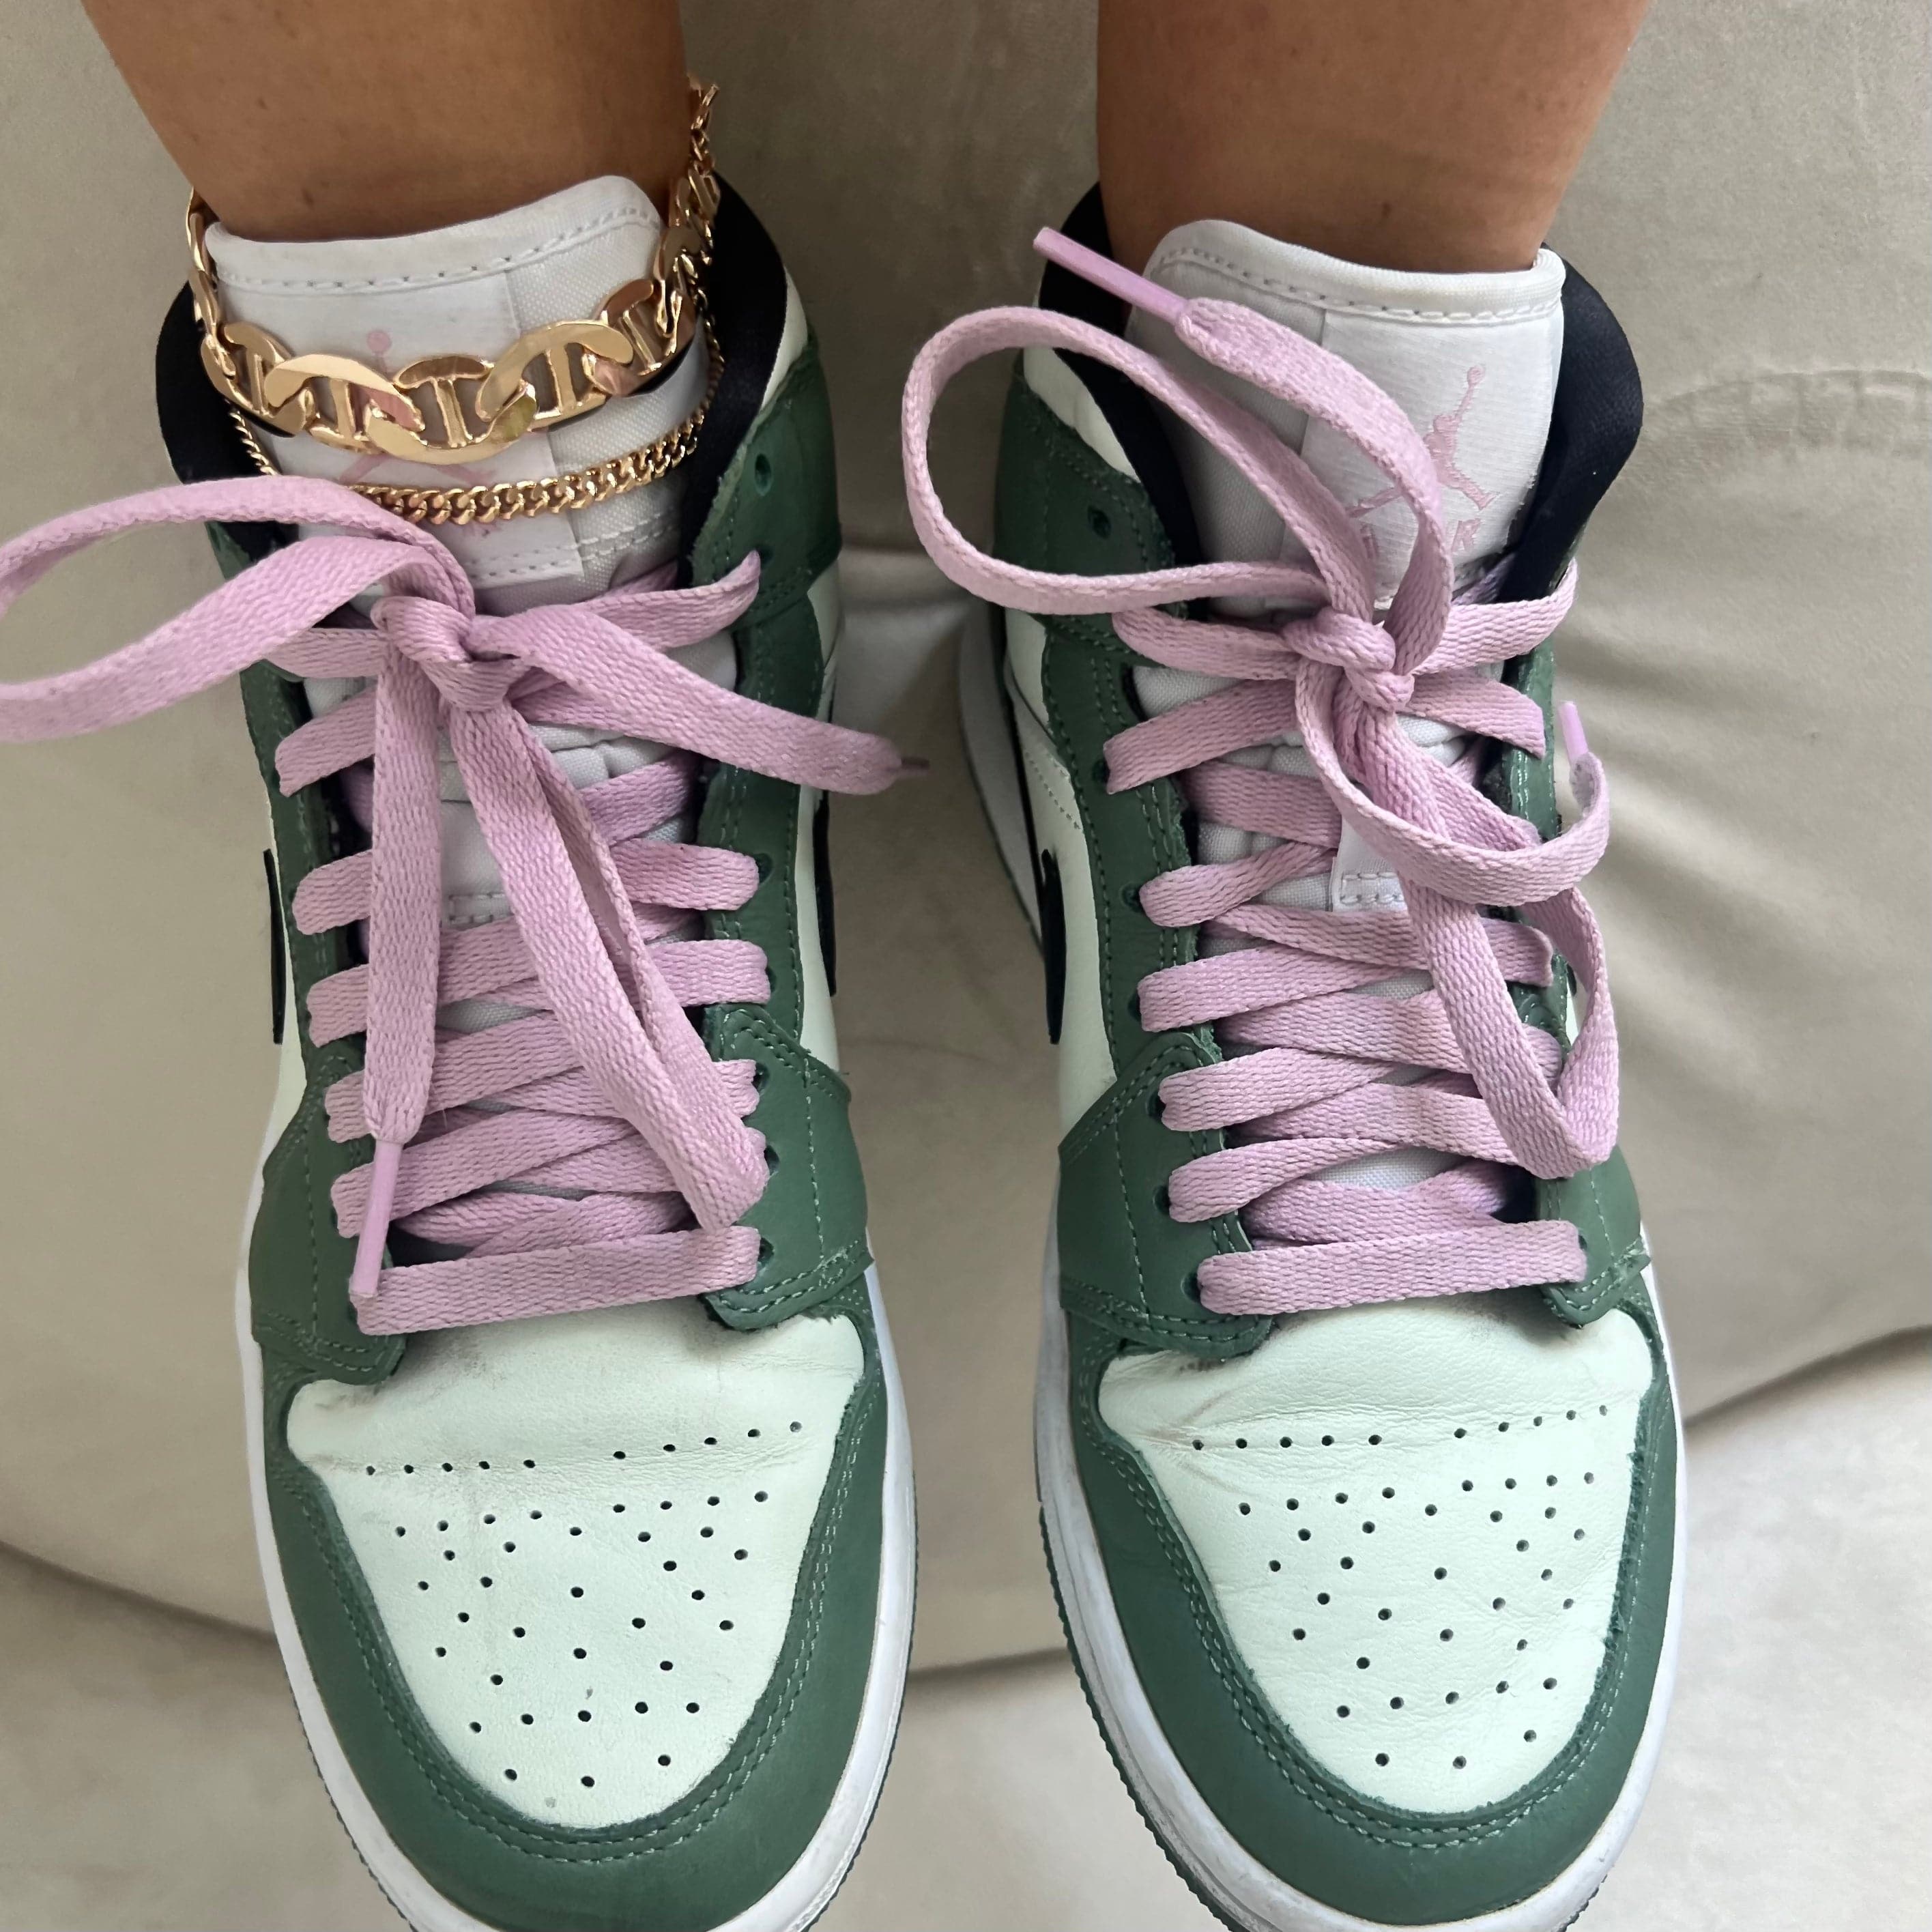 Heavy Link Anklet